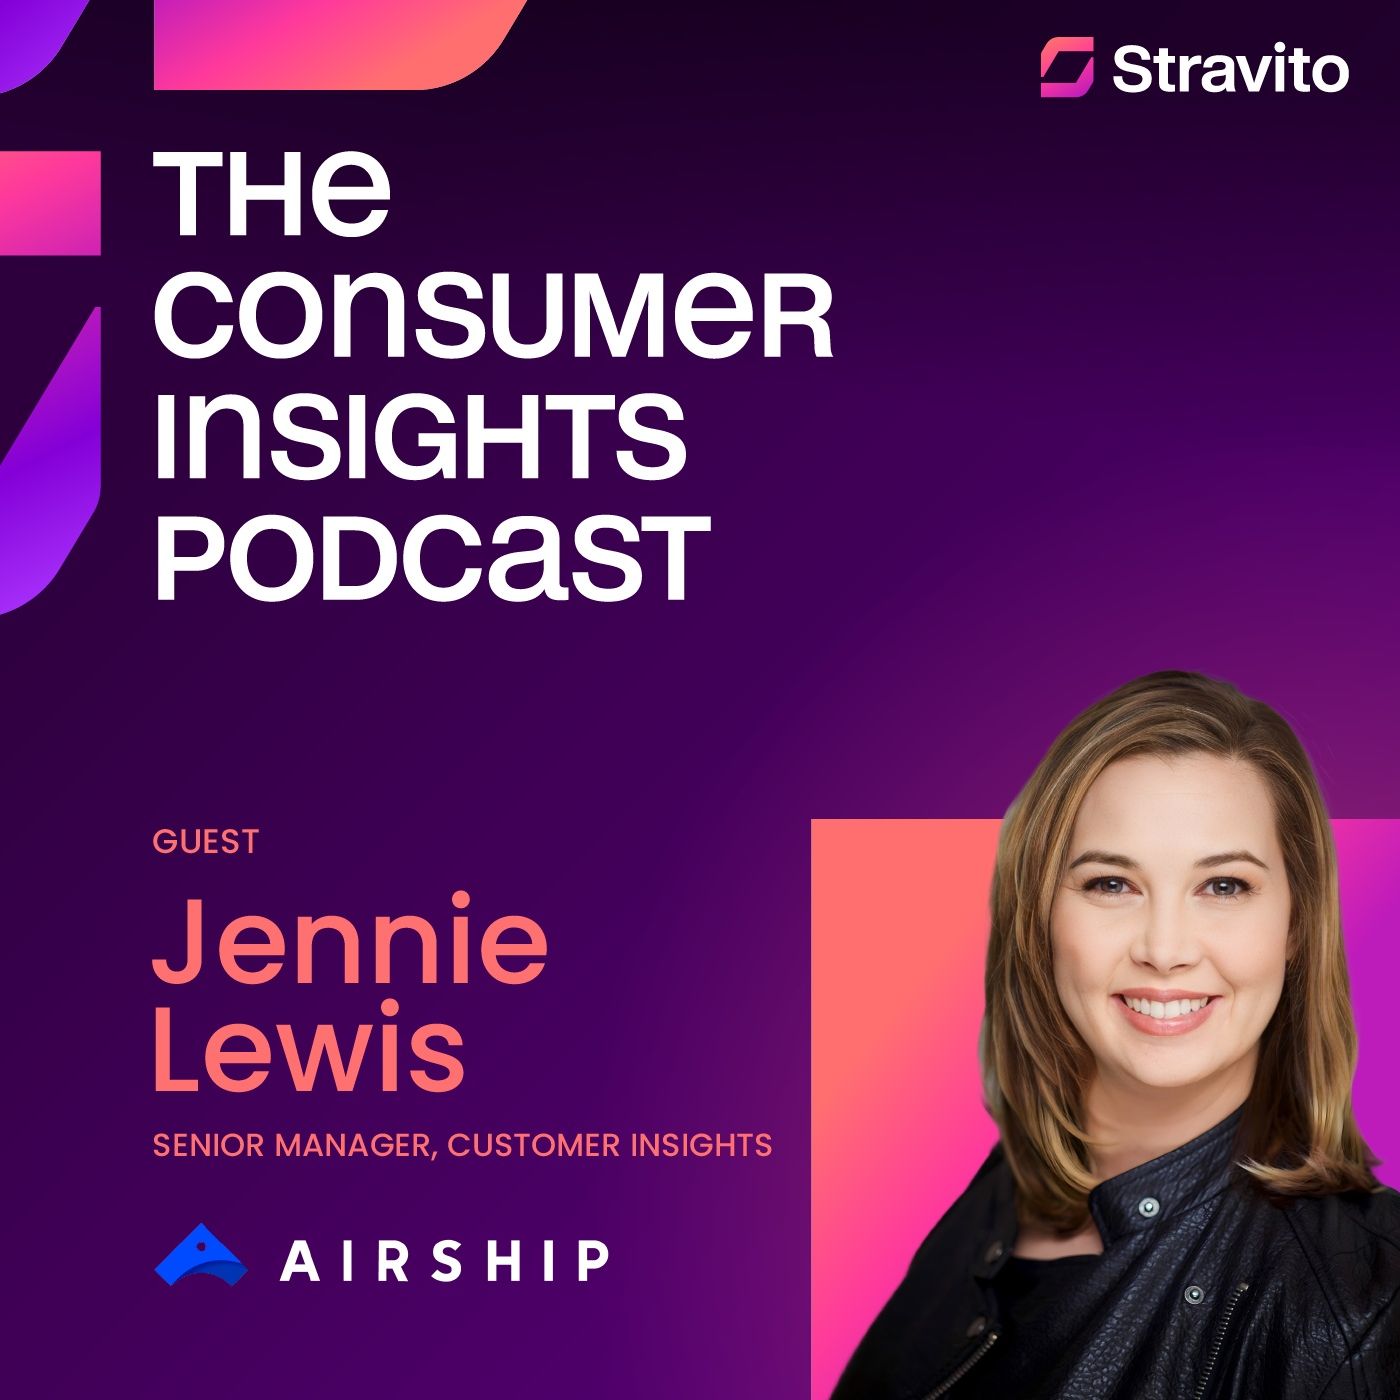 One-Size-Fits-All Fails: Jennie Lewis, Senior Manager of Customer Insights at Airship, on Mobile Personalization